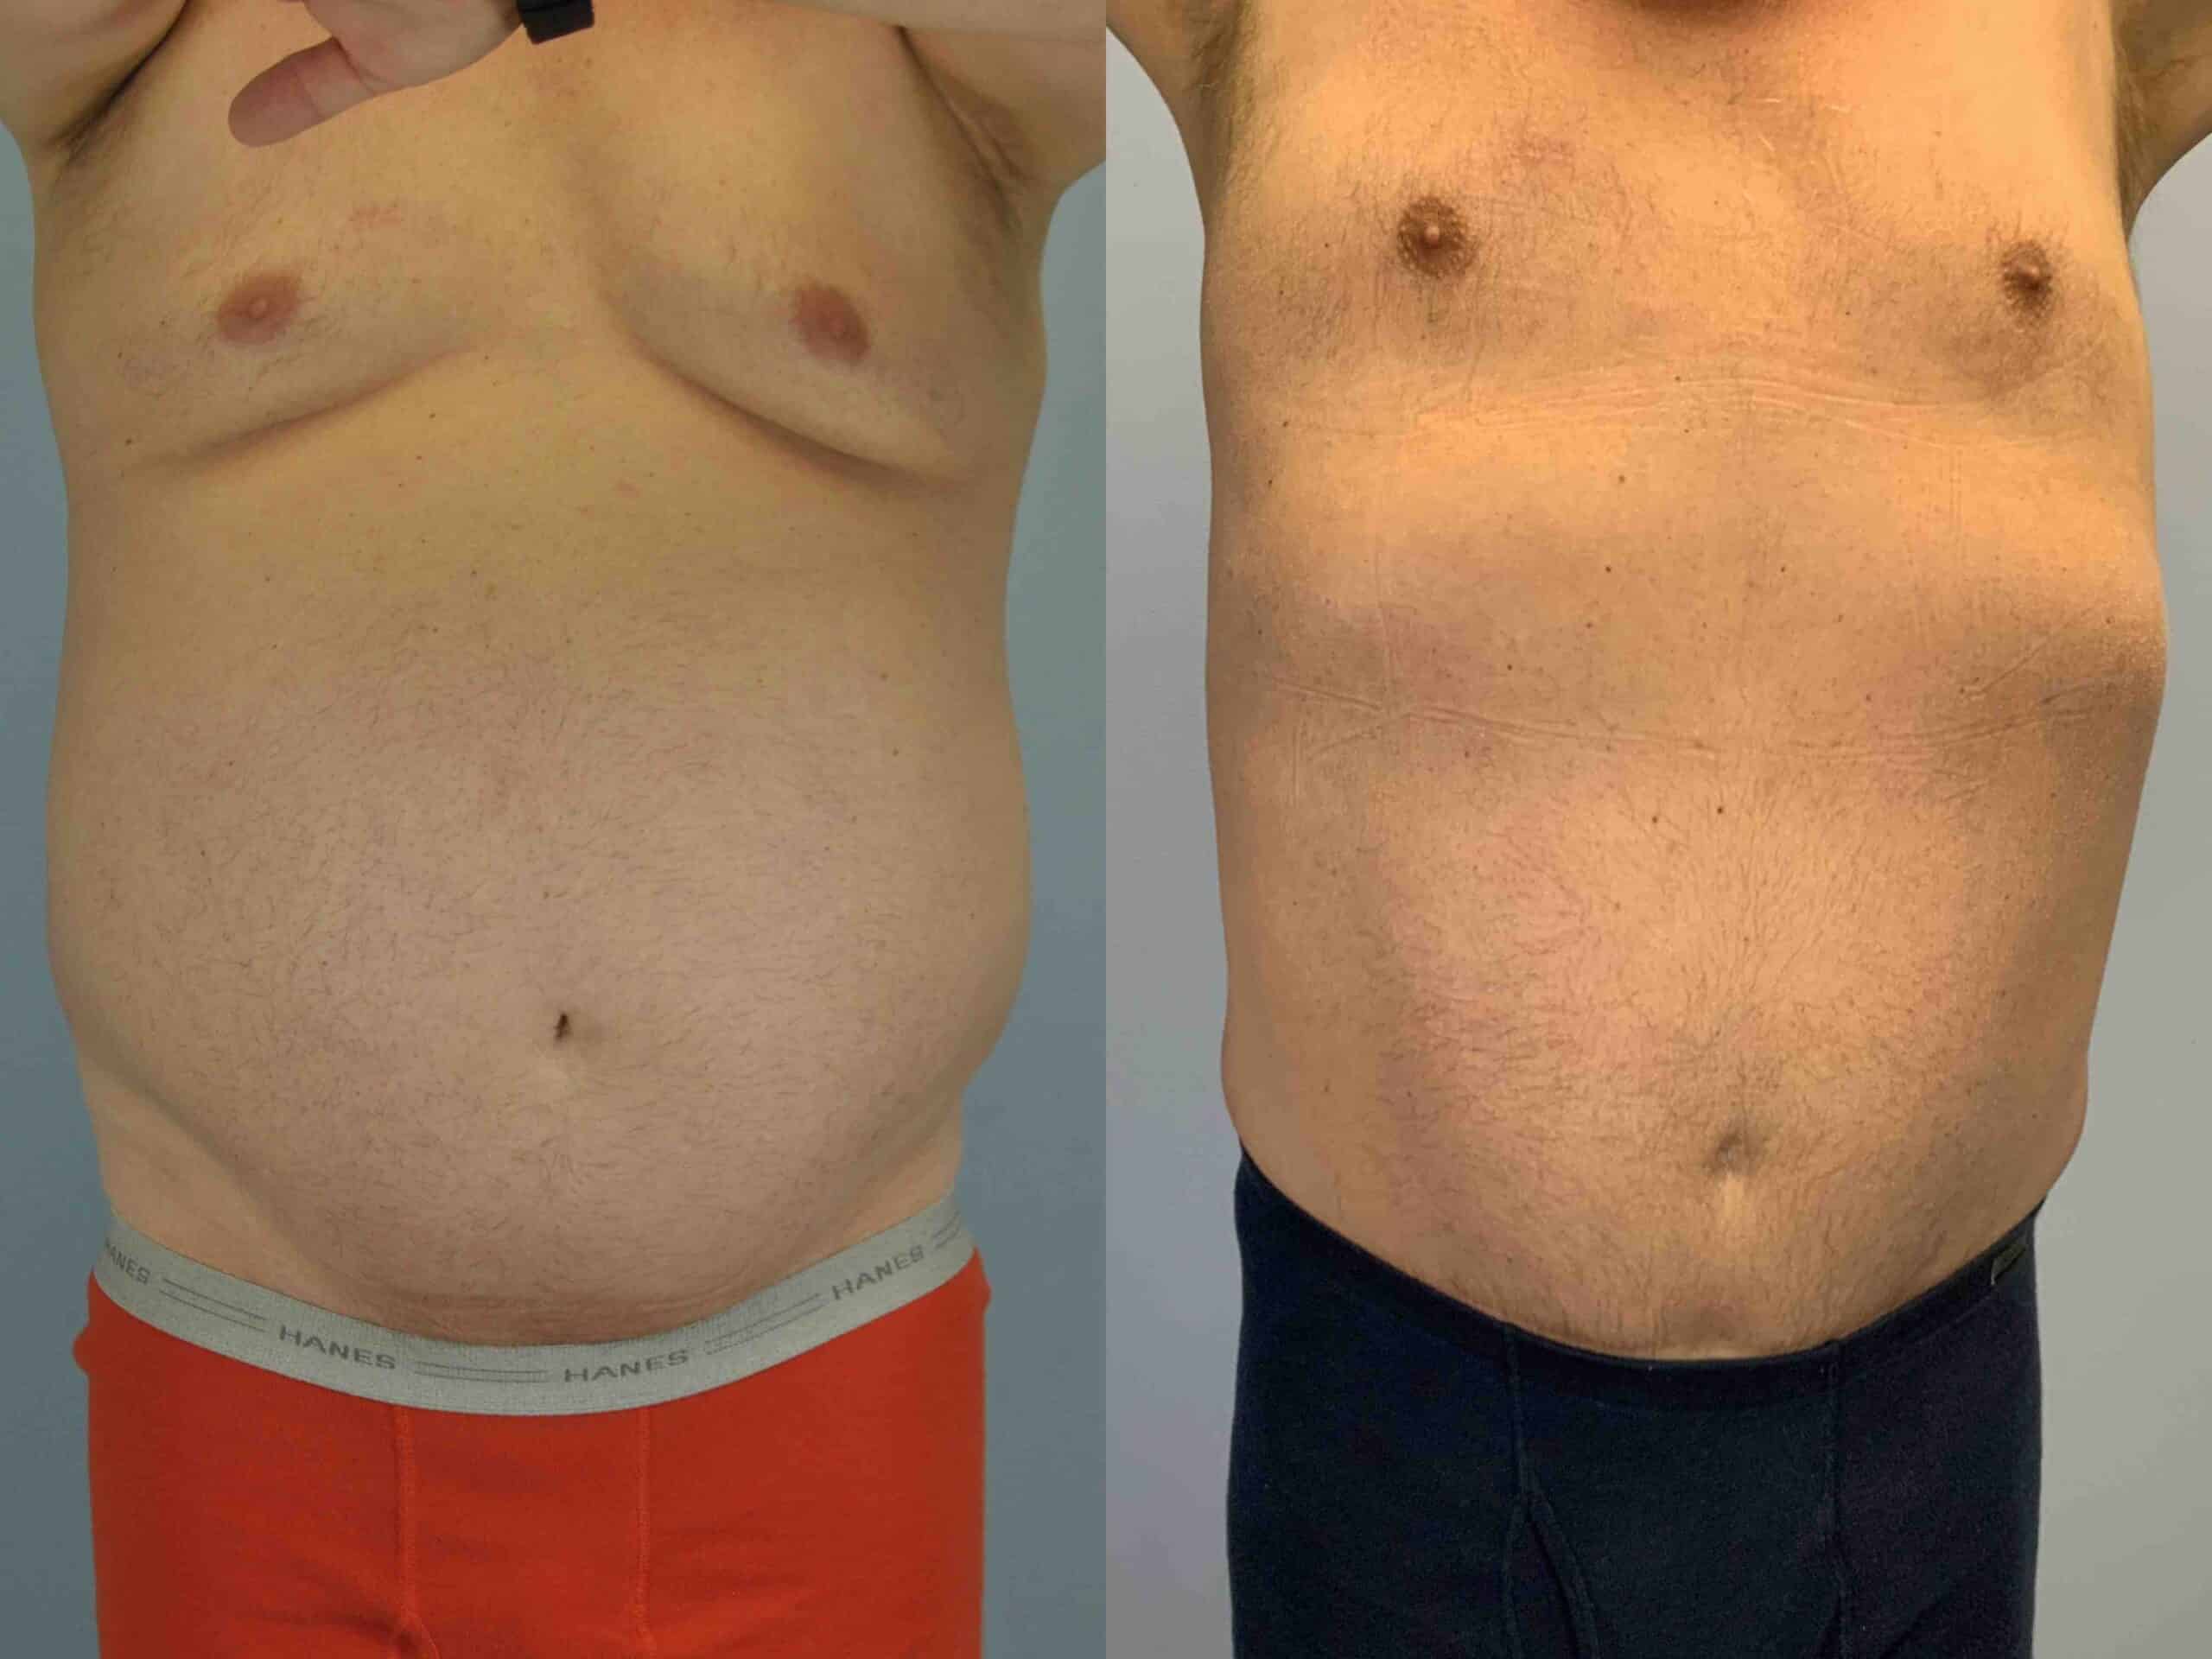 Before and after, patient 2 yrs post op from VASER Abdomen, and Flanks, Tummy Tuck procedures performed by Dr. Paul Vanek